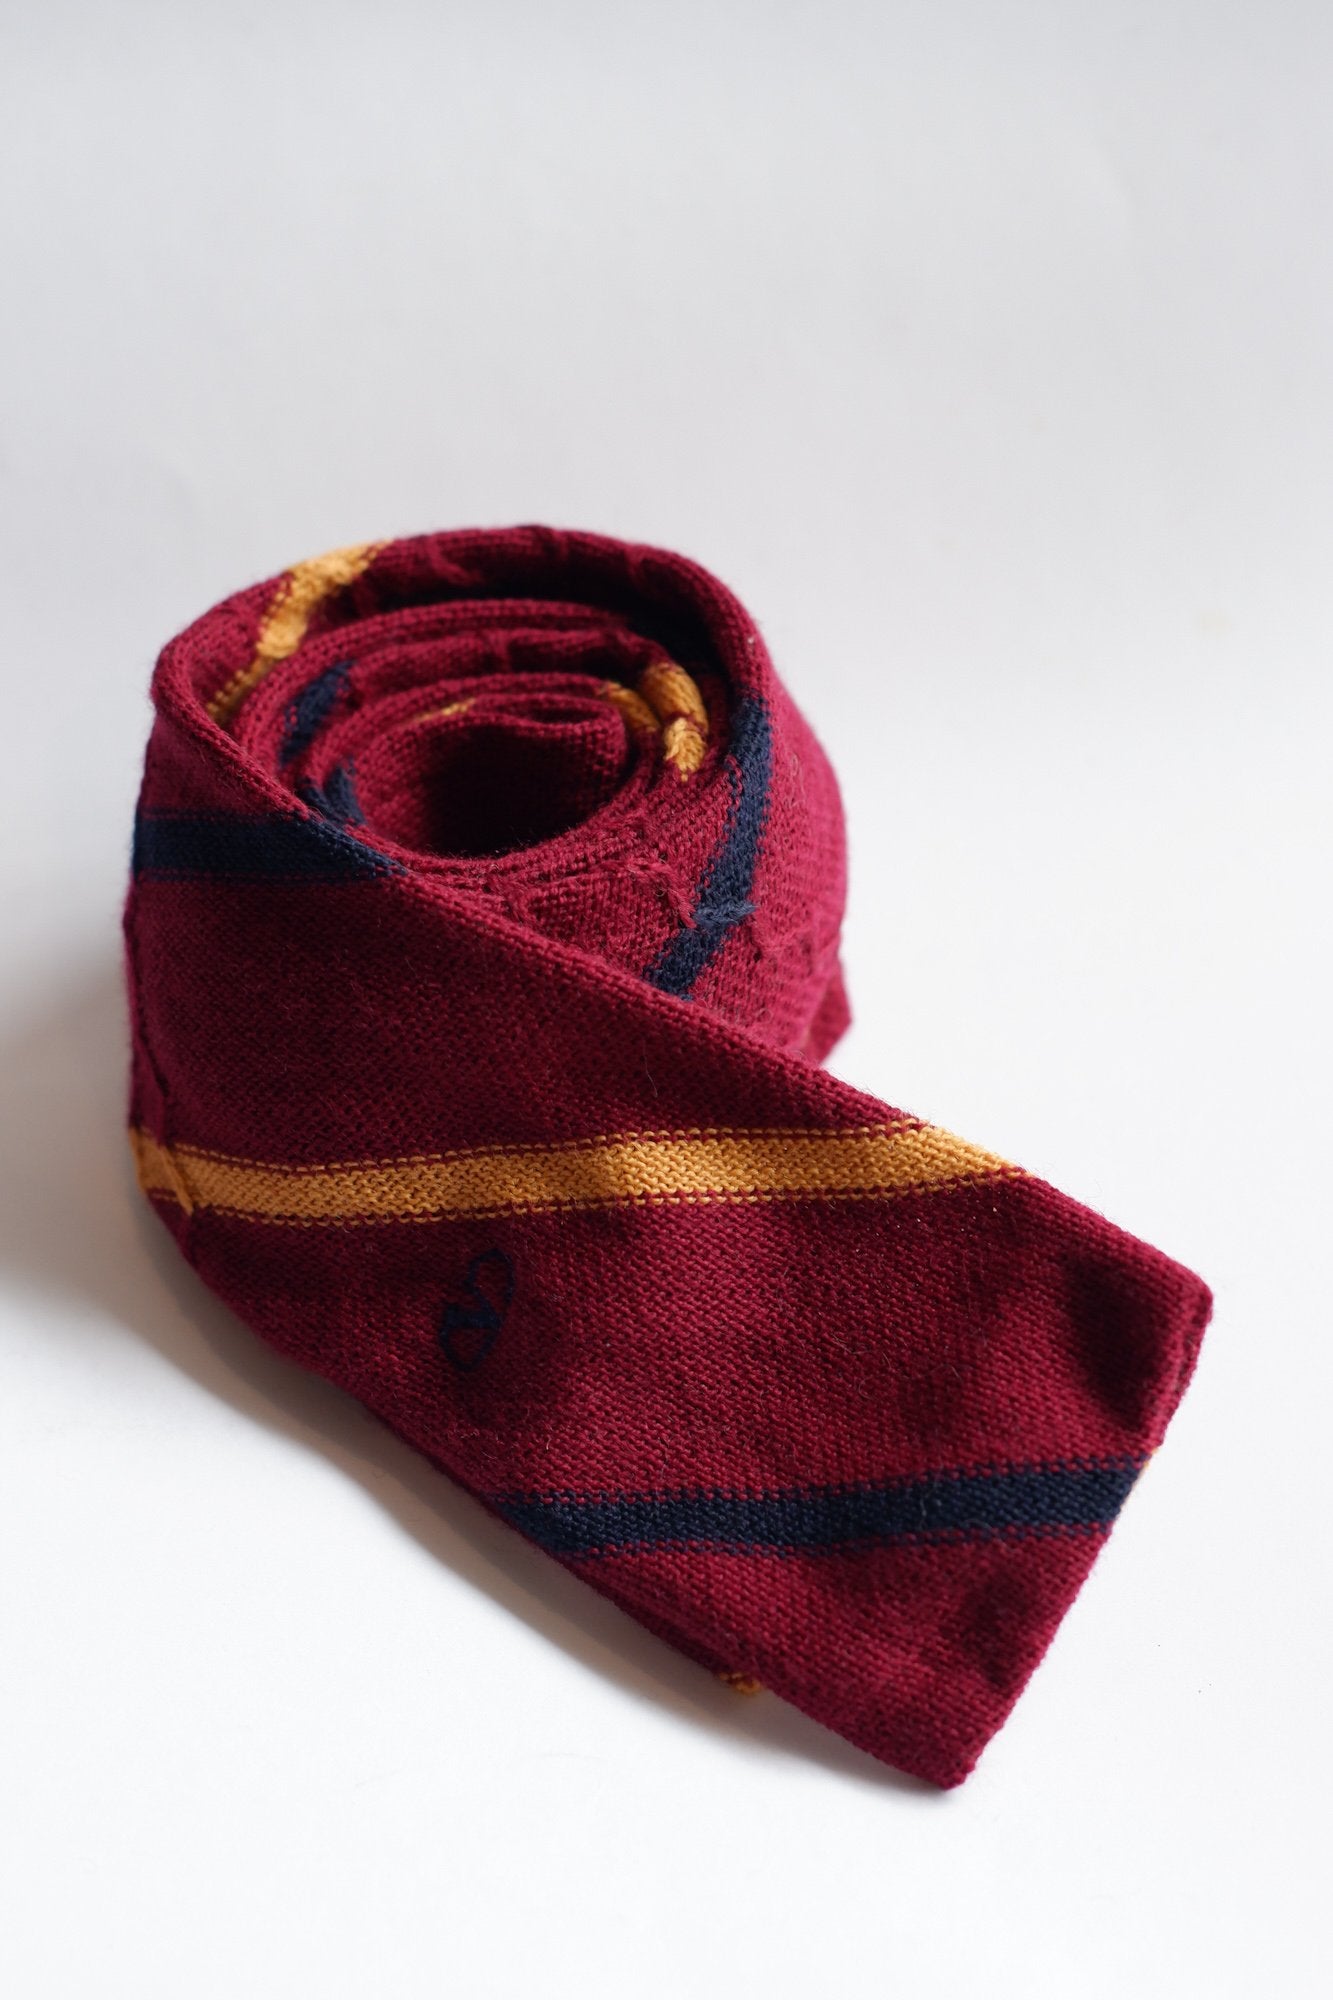 Valentino Red with Navy and Yellow Stripes Knitted Necktie